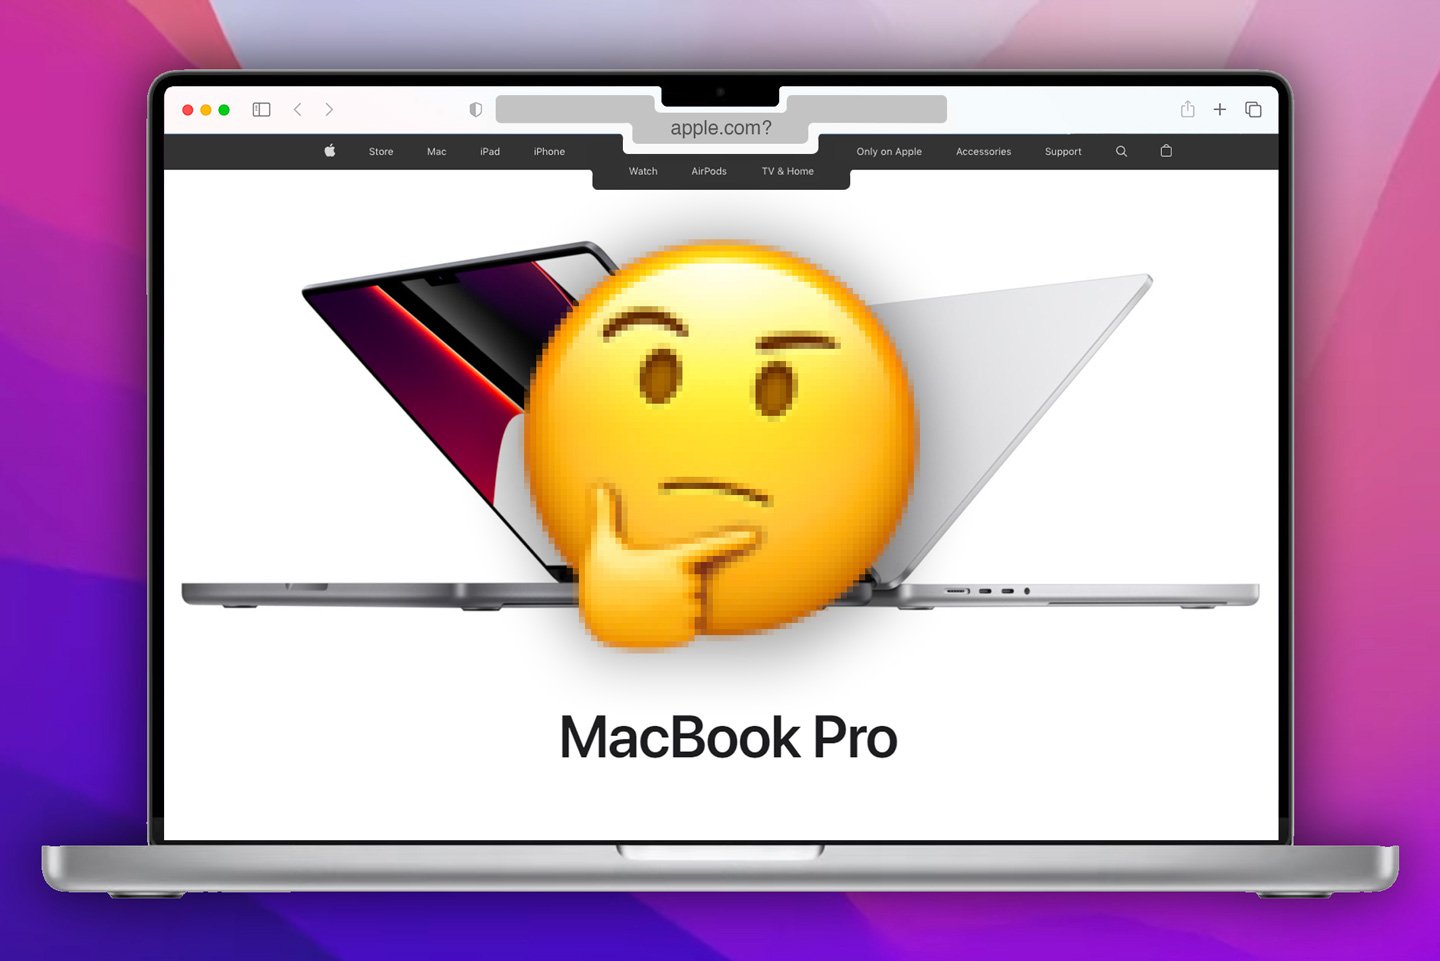 Why the notch on the new Apple MacBook is a TERRIBLE idea from a User